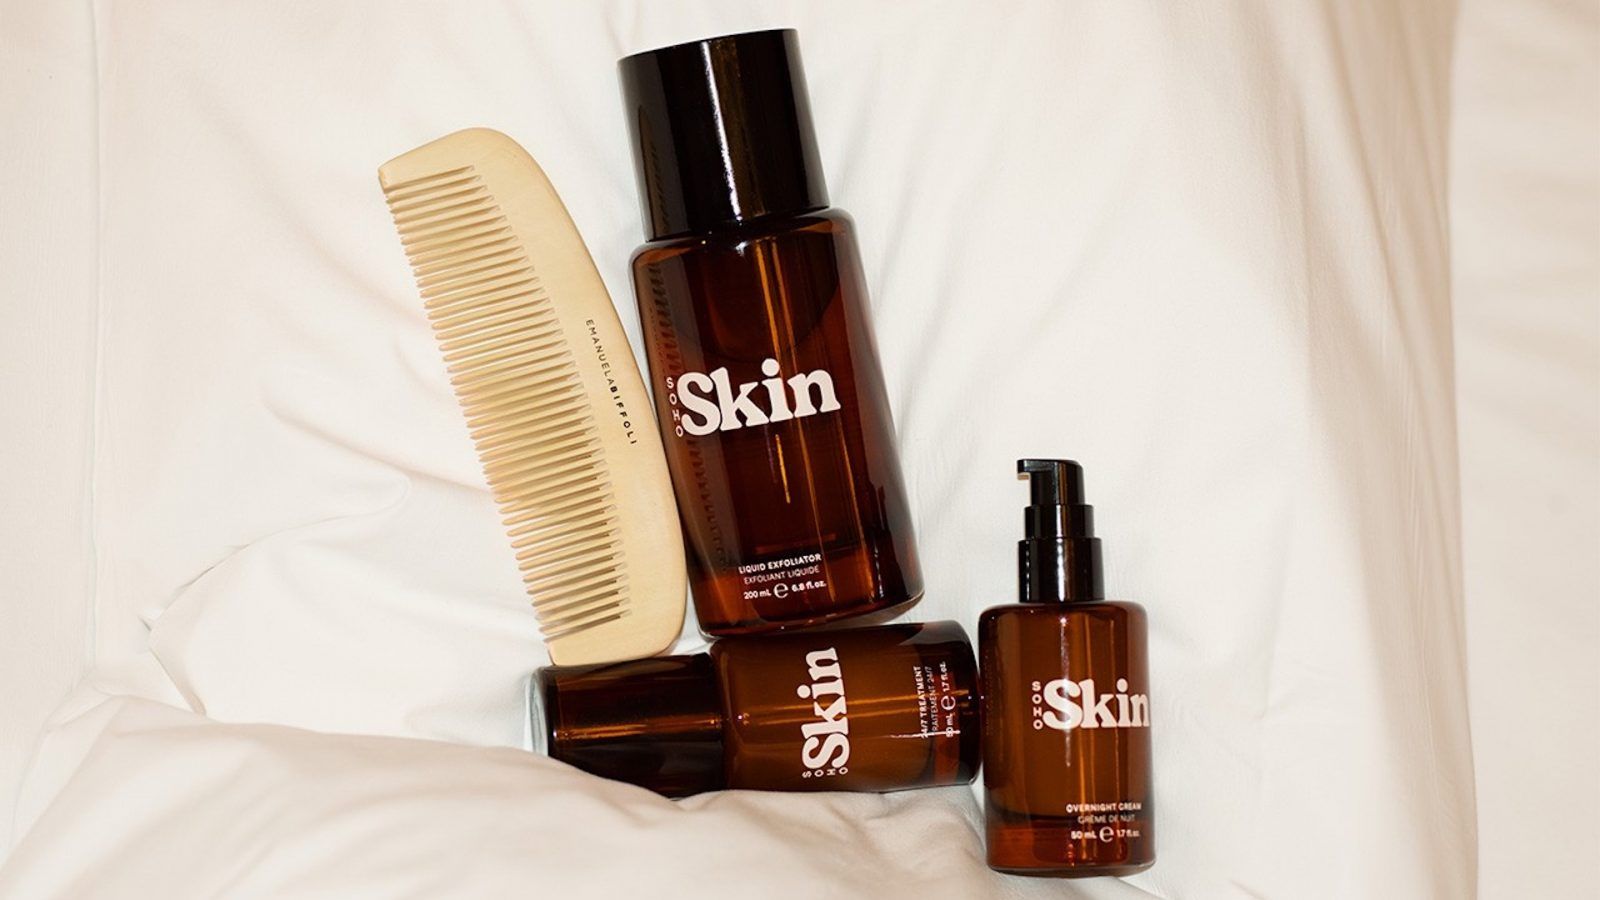 Soho House has launched Soho Skin, its very own skincare line